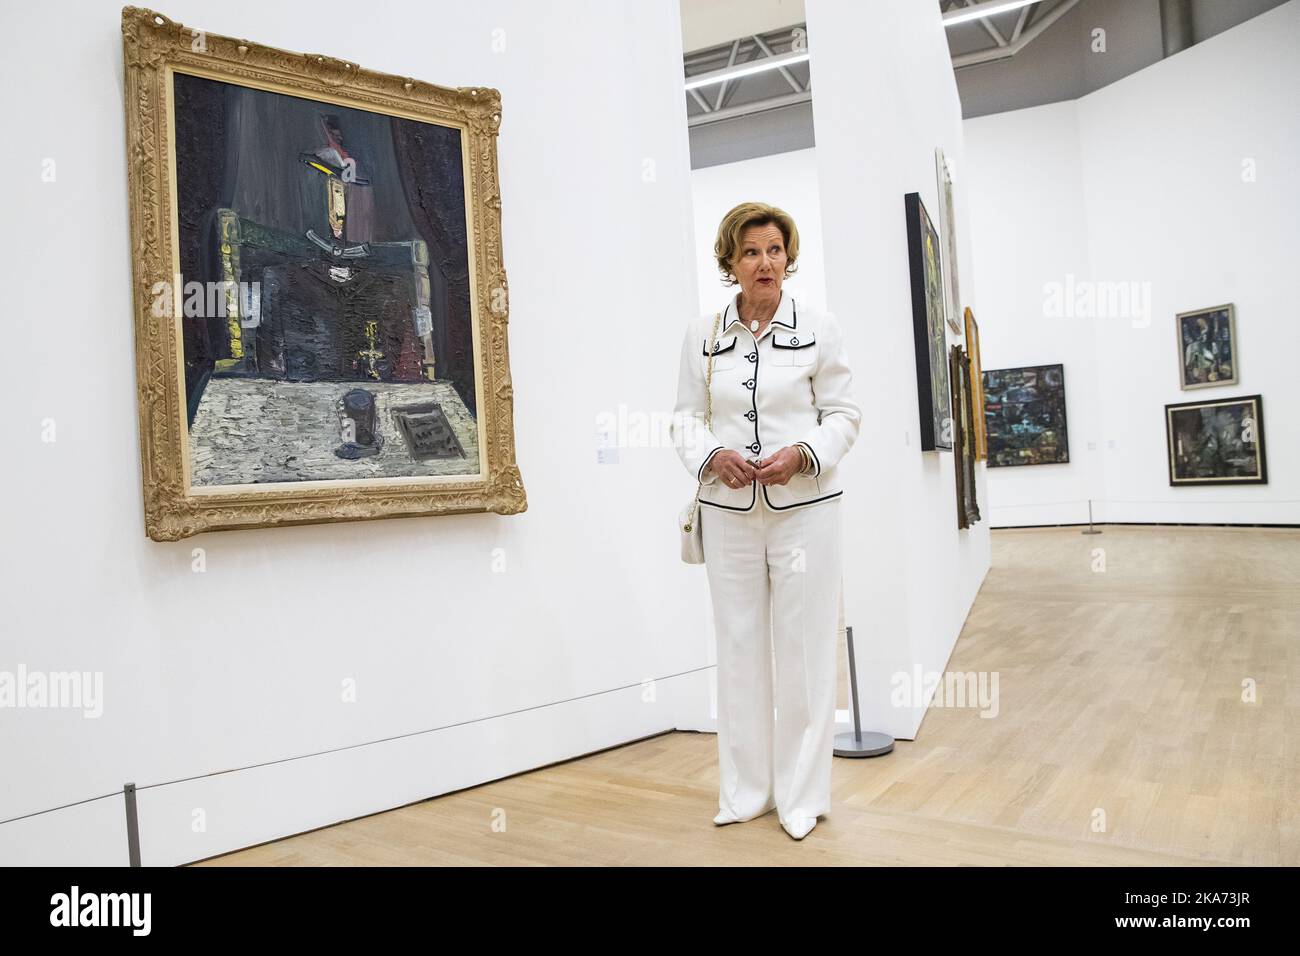 HOVIK, NORWAY 20180615. Queen Sonja is present during the opening of the Jakob Weidemann exhibition at Henie Onstad Art Center at Hovik. Here at the artwork Kongen. Photo: Haakon Mosvold Larsen / NTB scanpi  Stock Photo